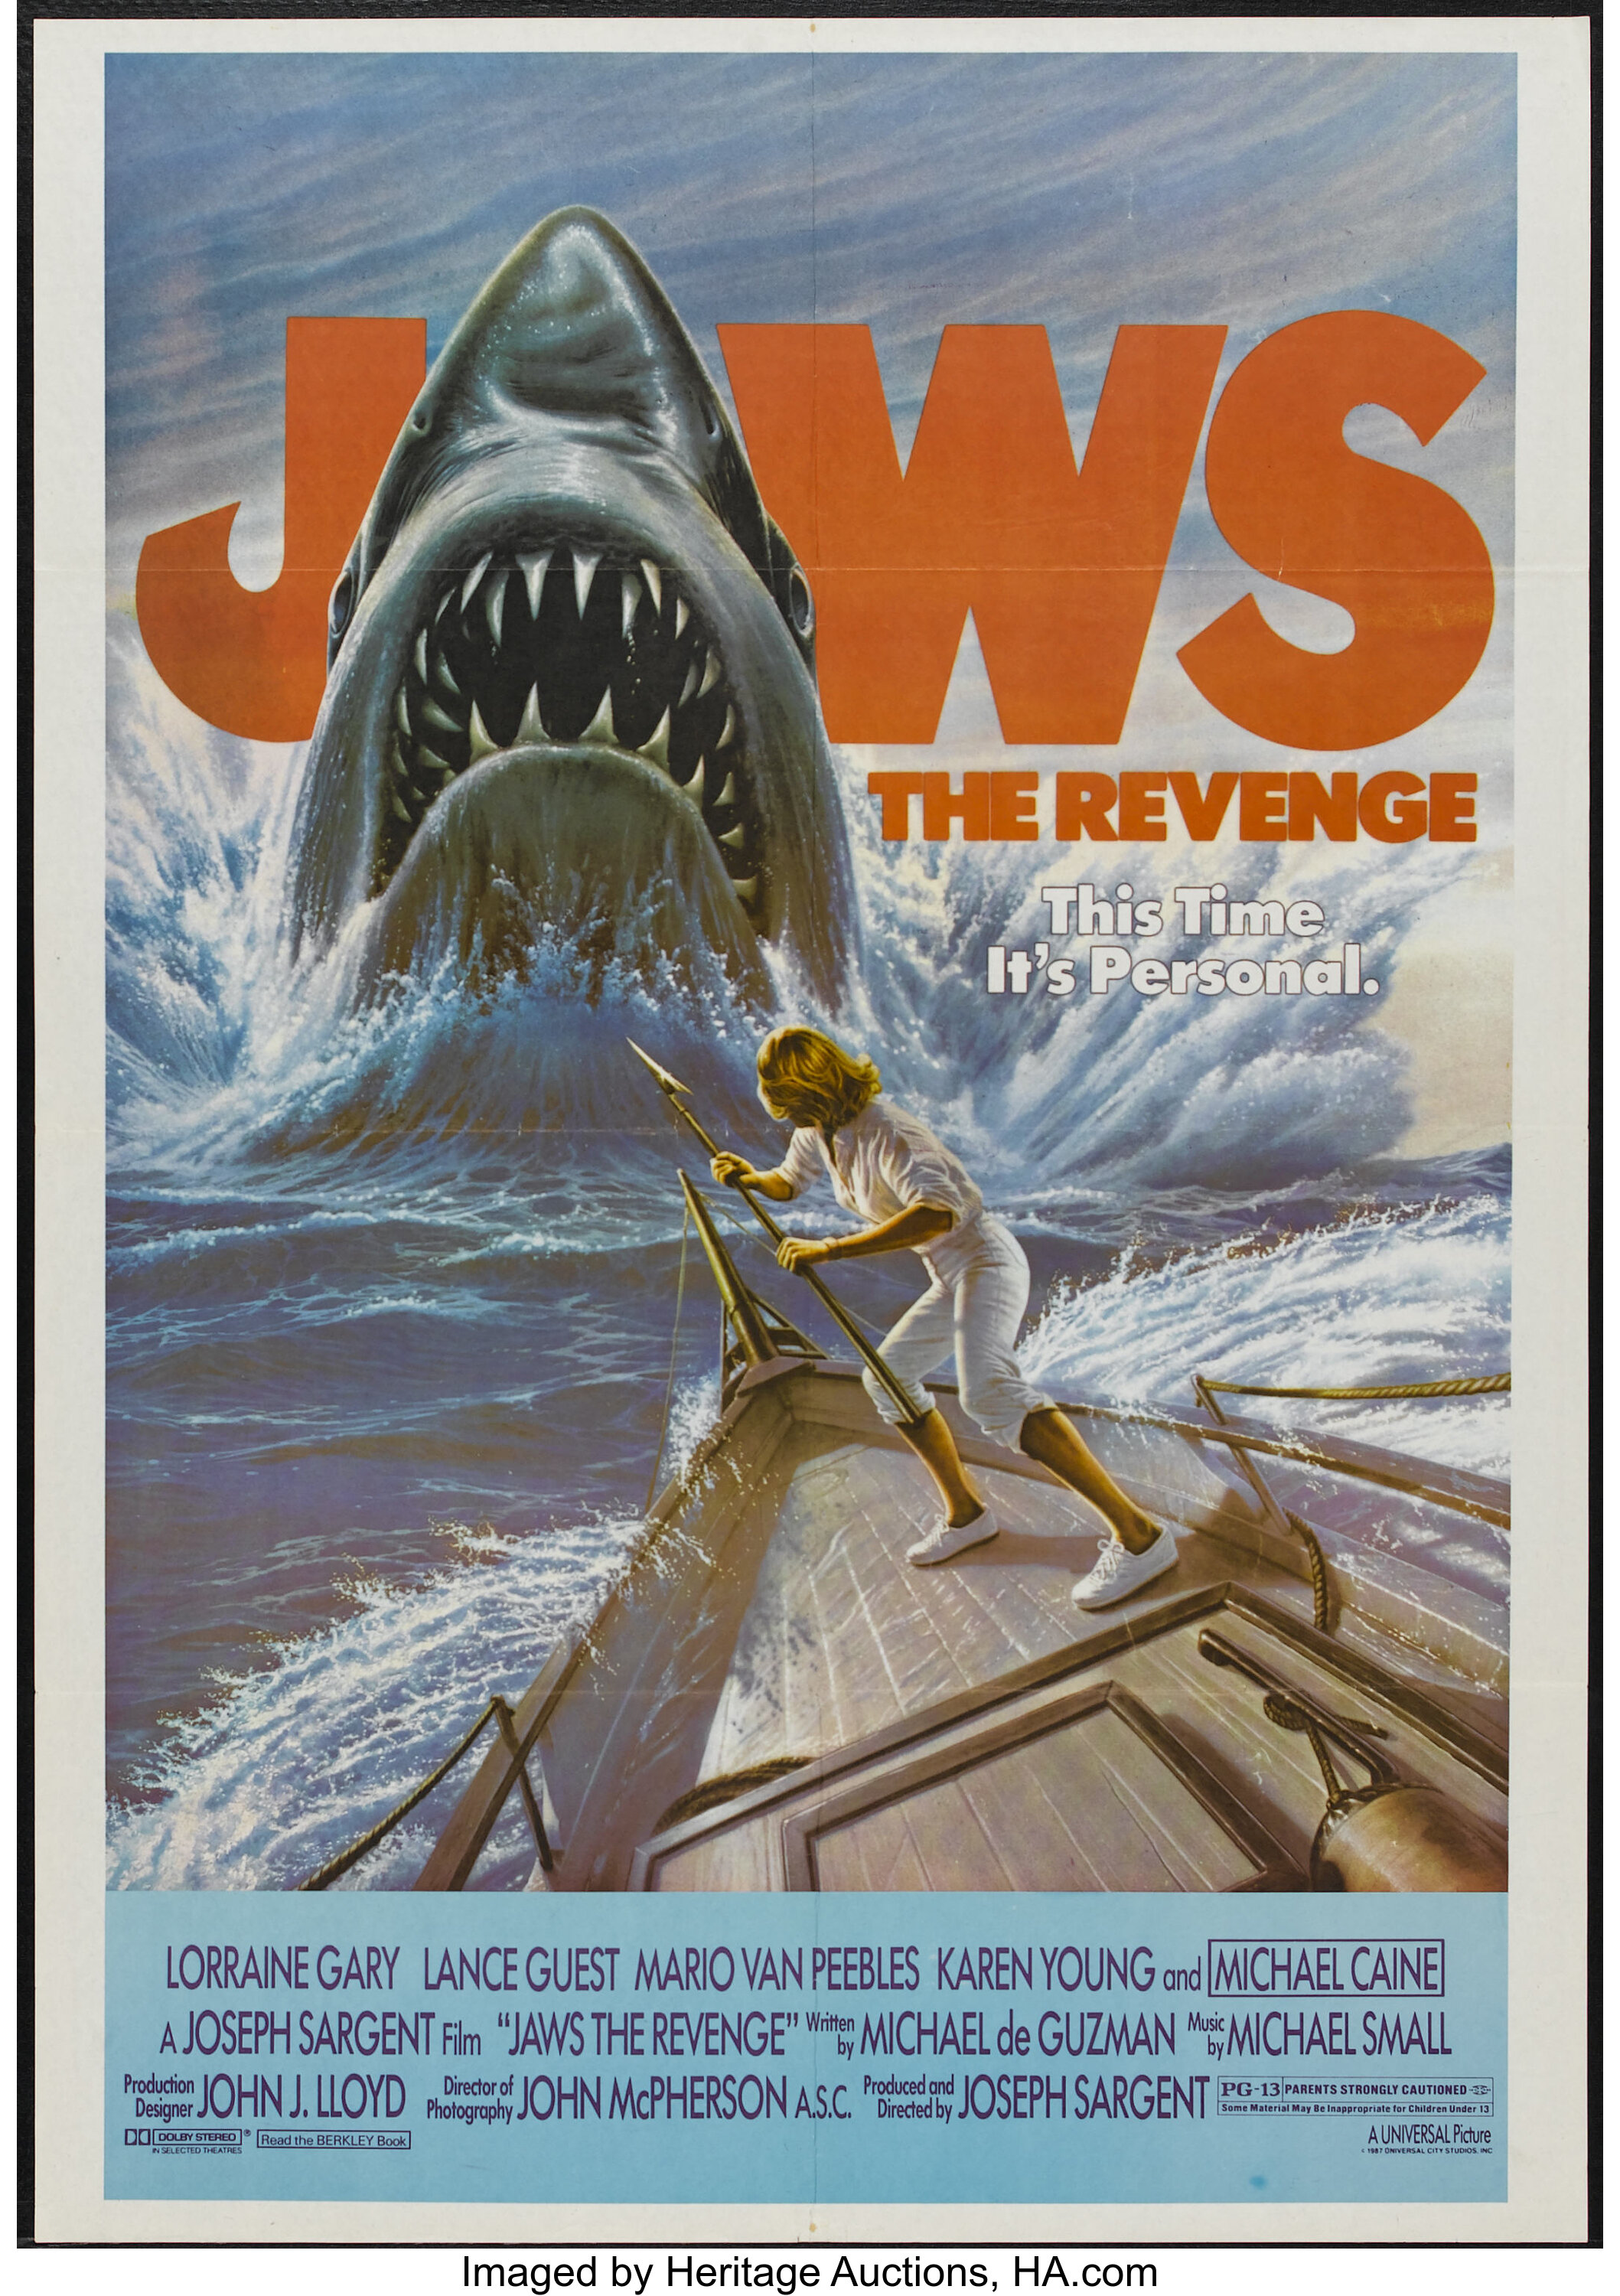 jaws 4 movie poster